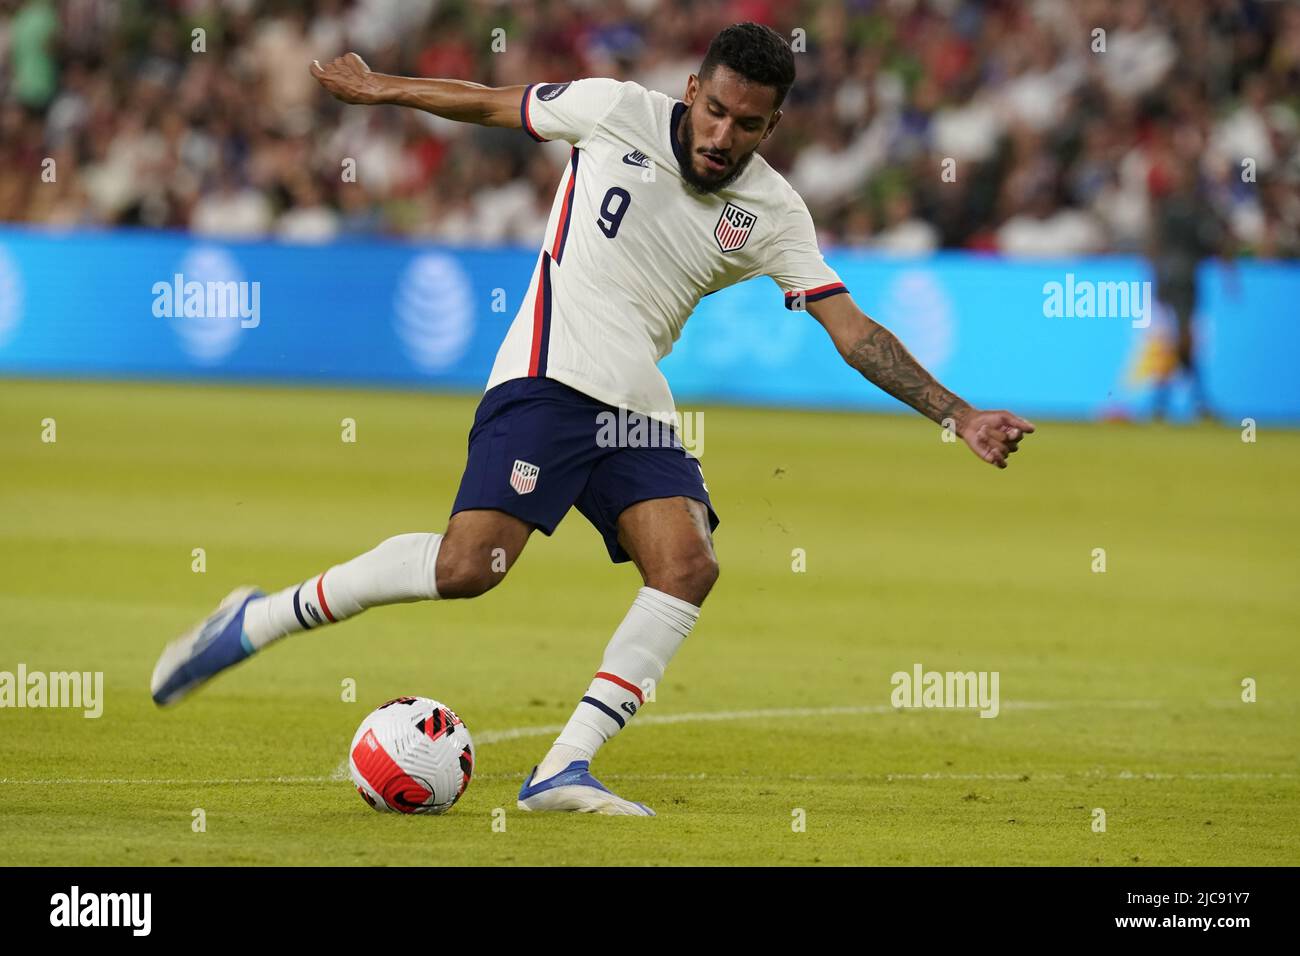 Austin, Texas USA, 10th June, 2022: JESUS FERREIRA (9) of the USA tries a goal kick during second half action of a CONCACAF Nation's League match at Austin's Q2 Stadium. This is the U.S. Men's National Team's (USMNT) final match in the U.S. before the 2022 FIFA World Cup. Credit: Bob Daemmrich/Alamy Live News Stock Photo